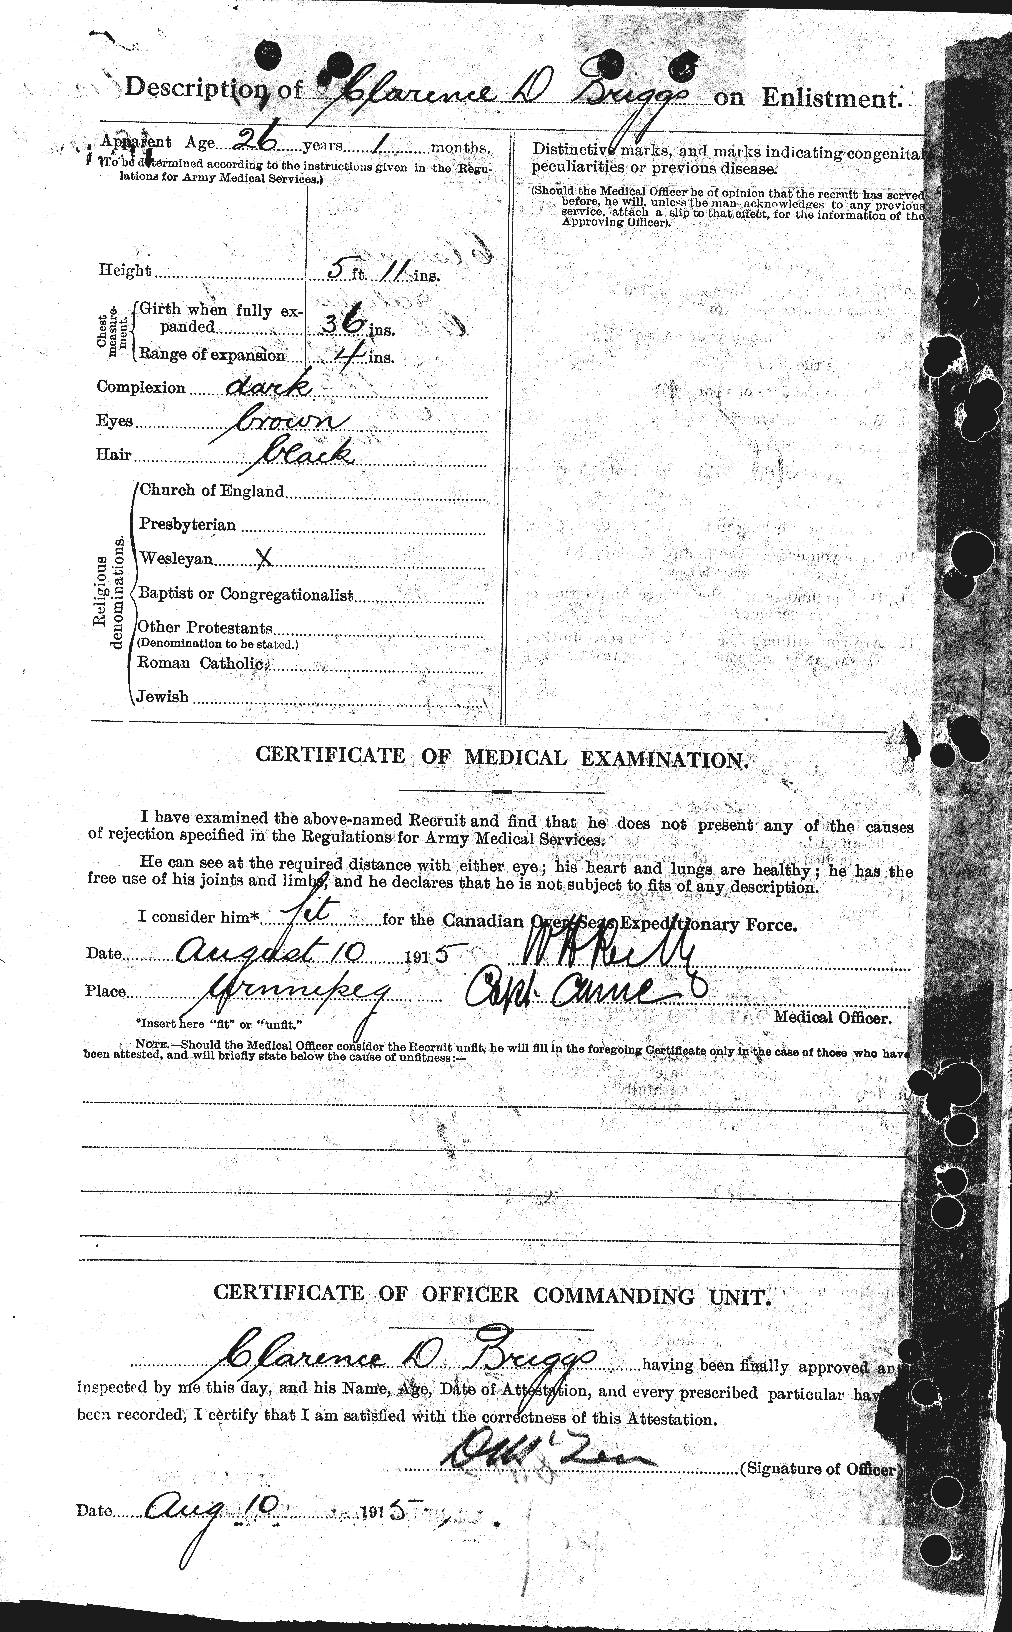 Personnel Records of the First World War - CEF 263983b